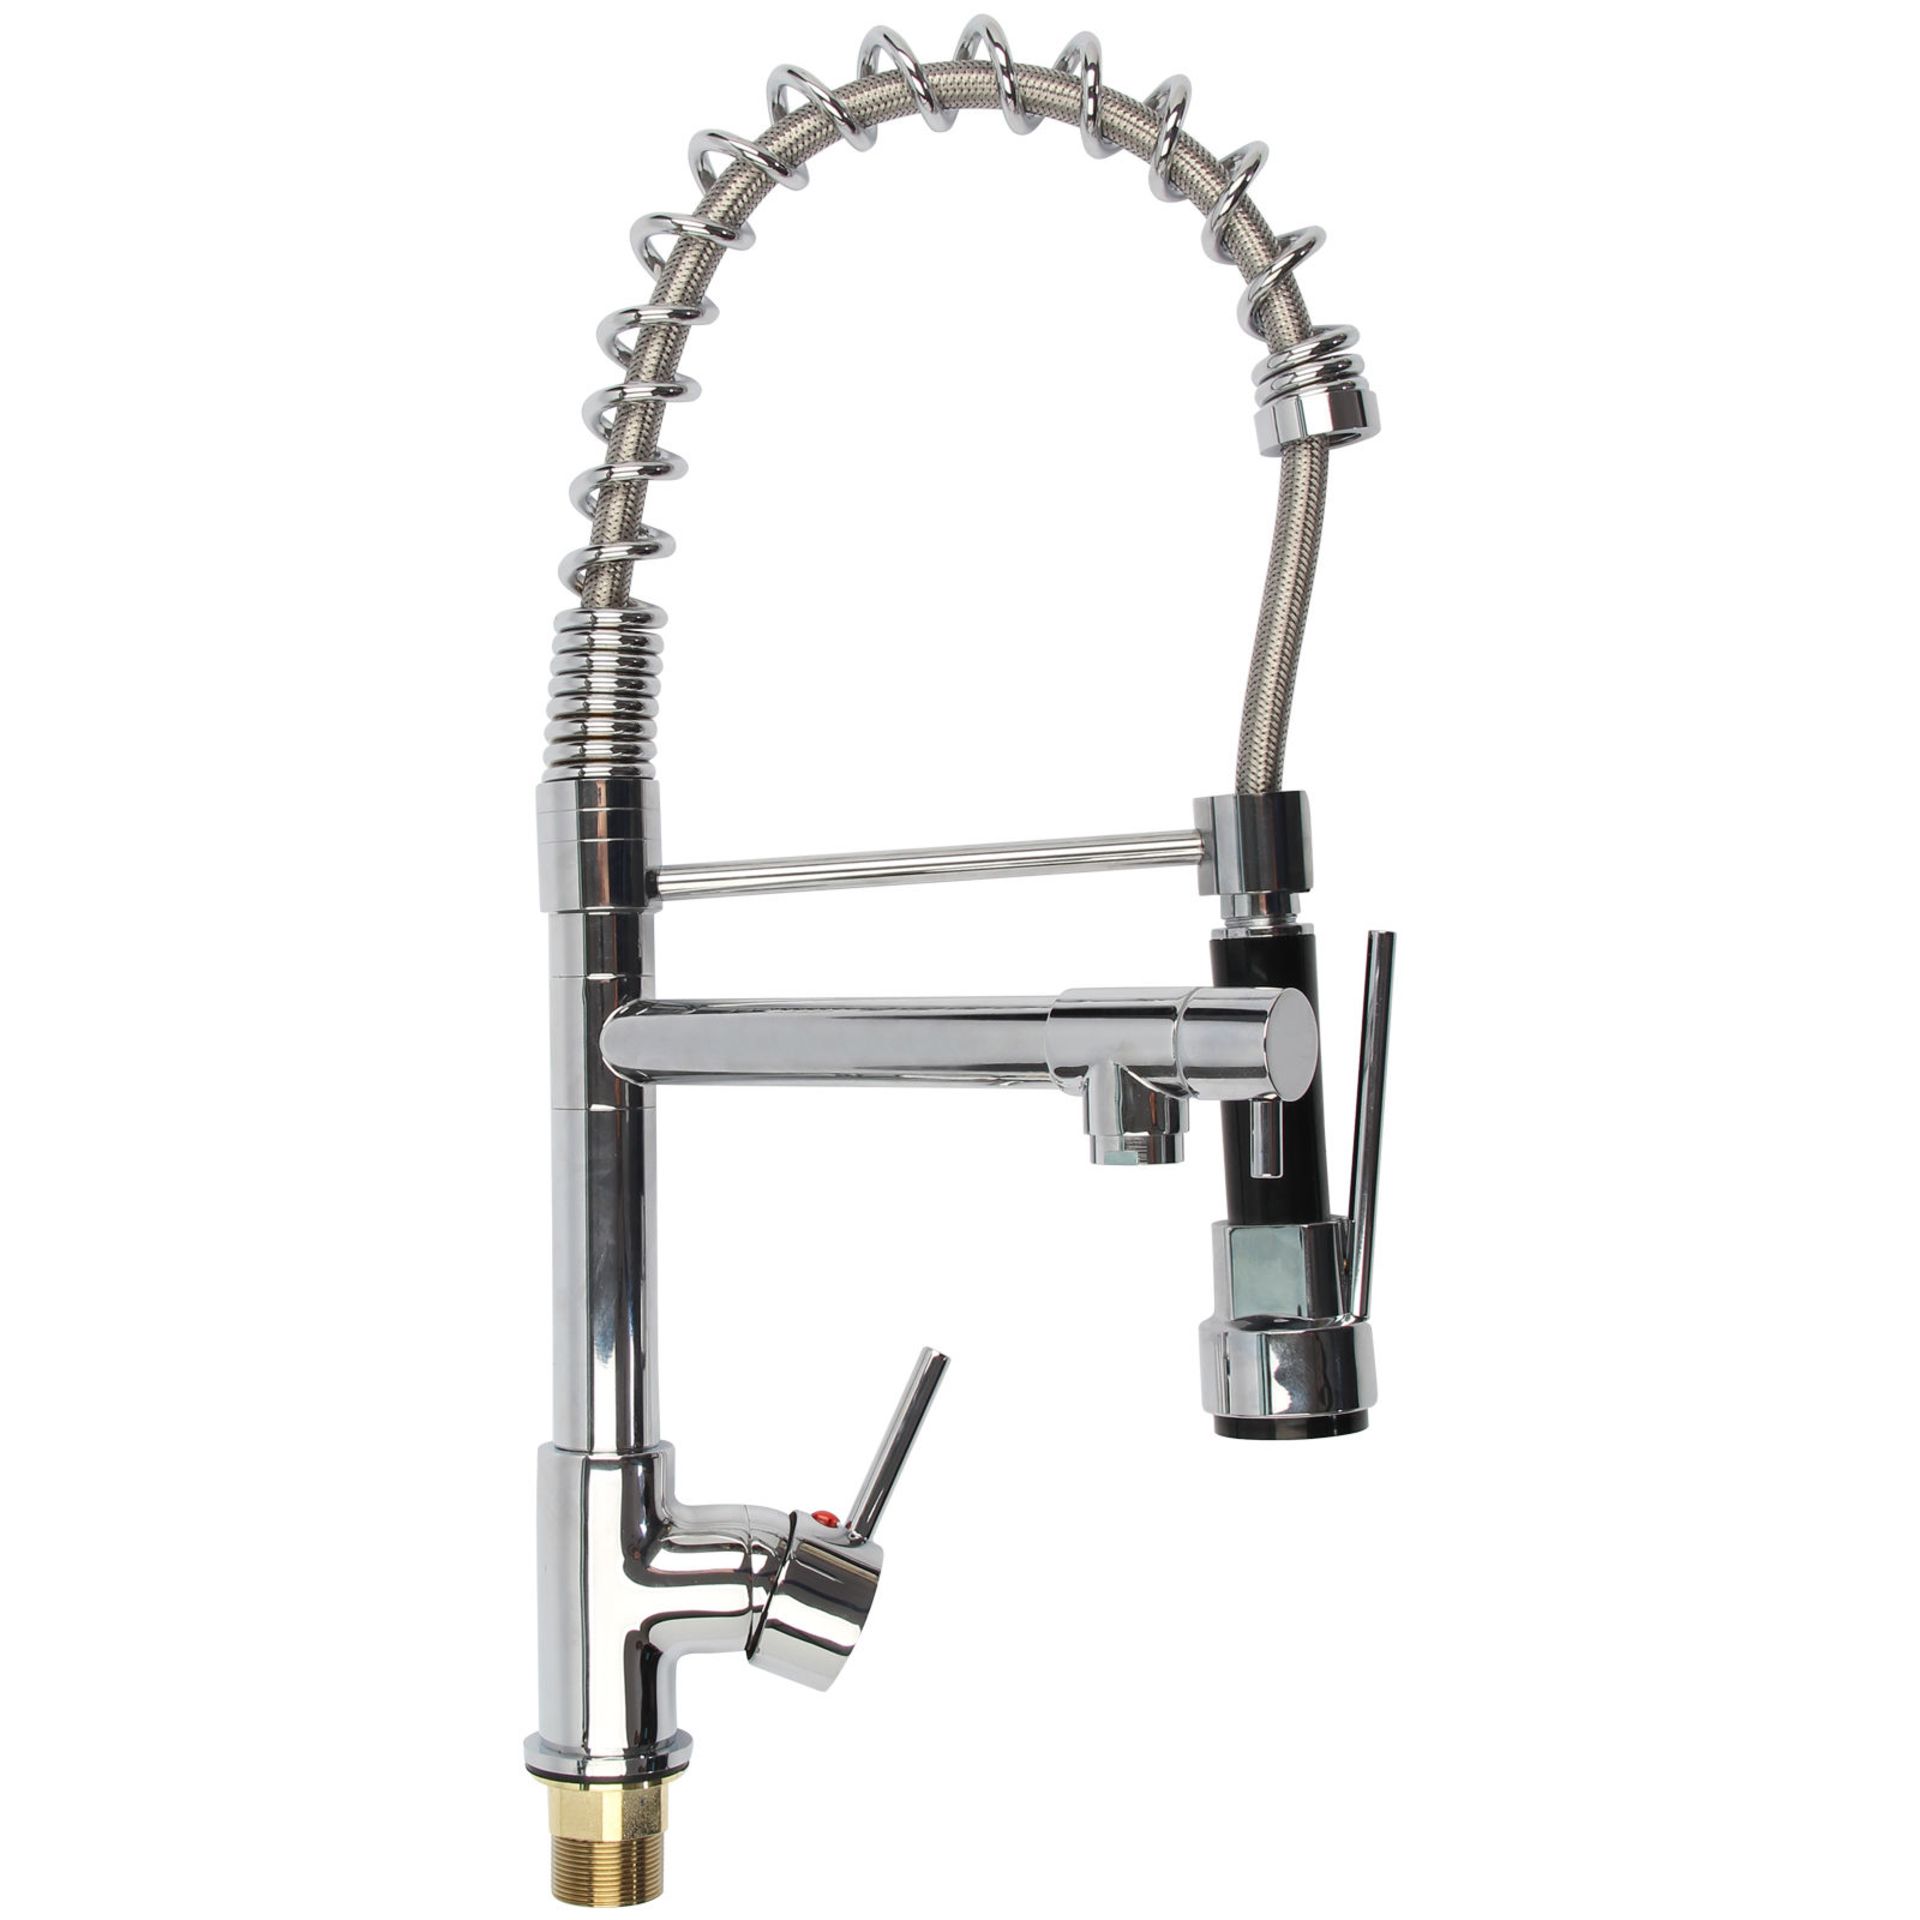 (MW191) Bentley Modern Monobloc Chrome Brass Pull Out Spray Mixer Tap. RRP £349.99. This tap is from - Bild 4 aus 6